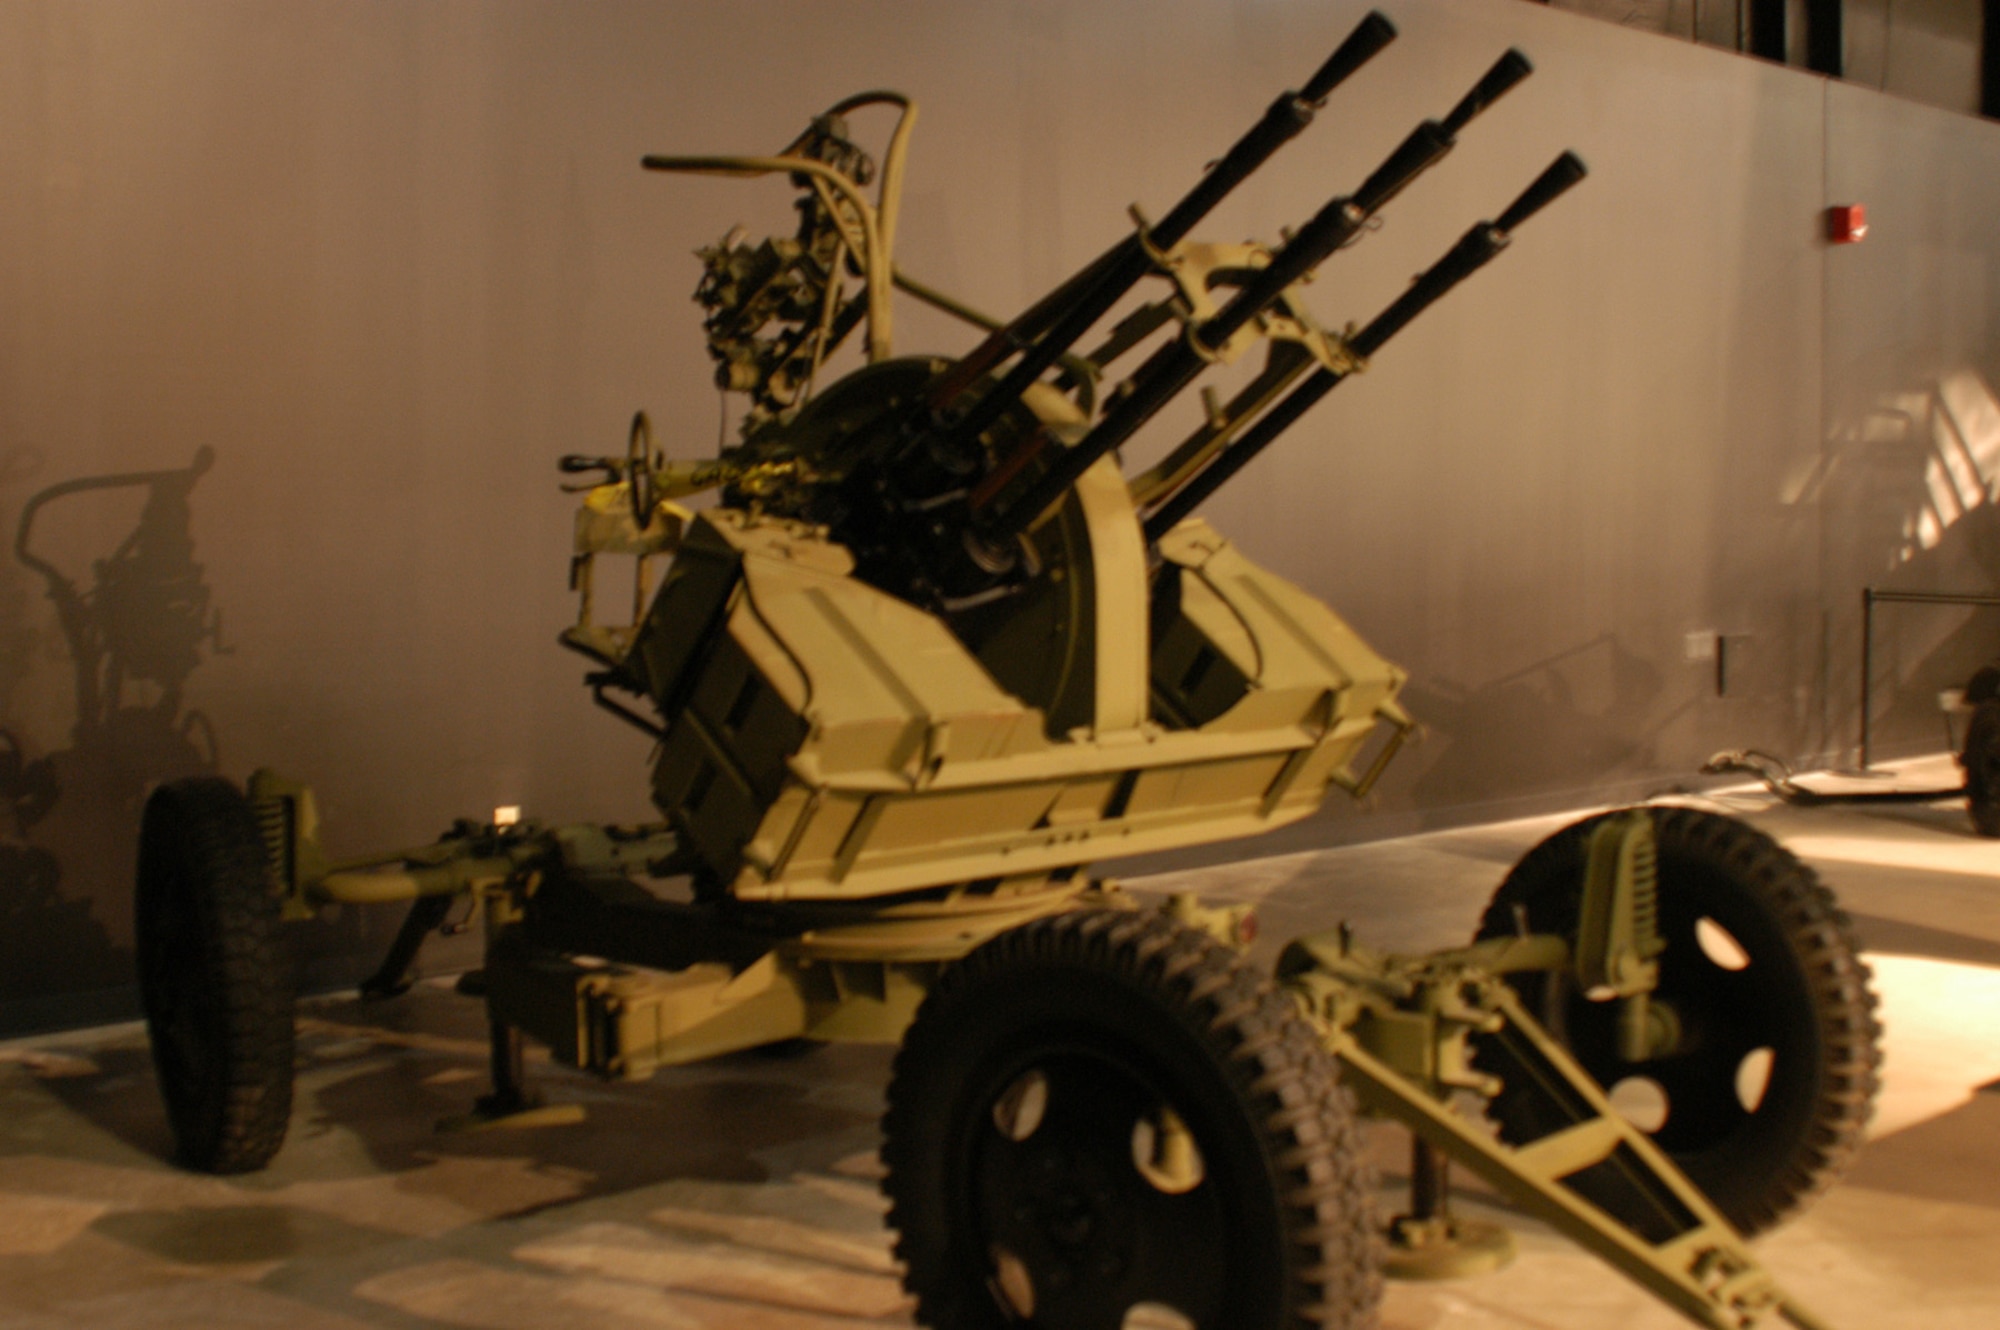 This ZPU-4 is a Soviet-built anti-aircraft gun. It is composed of four KPV 14.5mm heavy machine guns mounted on a four-wheel carriage. The ZPU-4 was used by the Iraqis in 1991 during Operation Desert Storm. (U.S. Air Force photo)